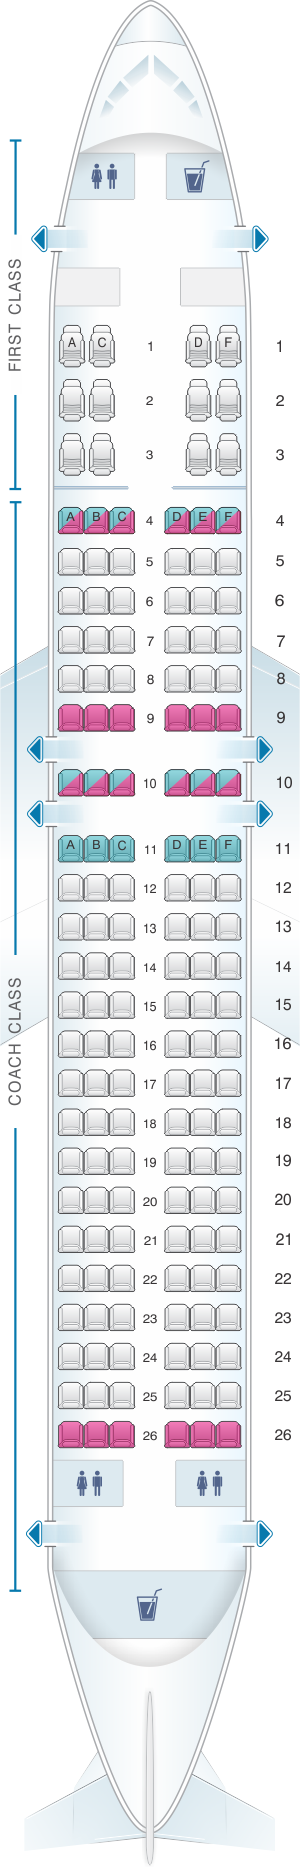 Seat map for US Airways Airbus A320